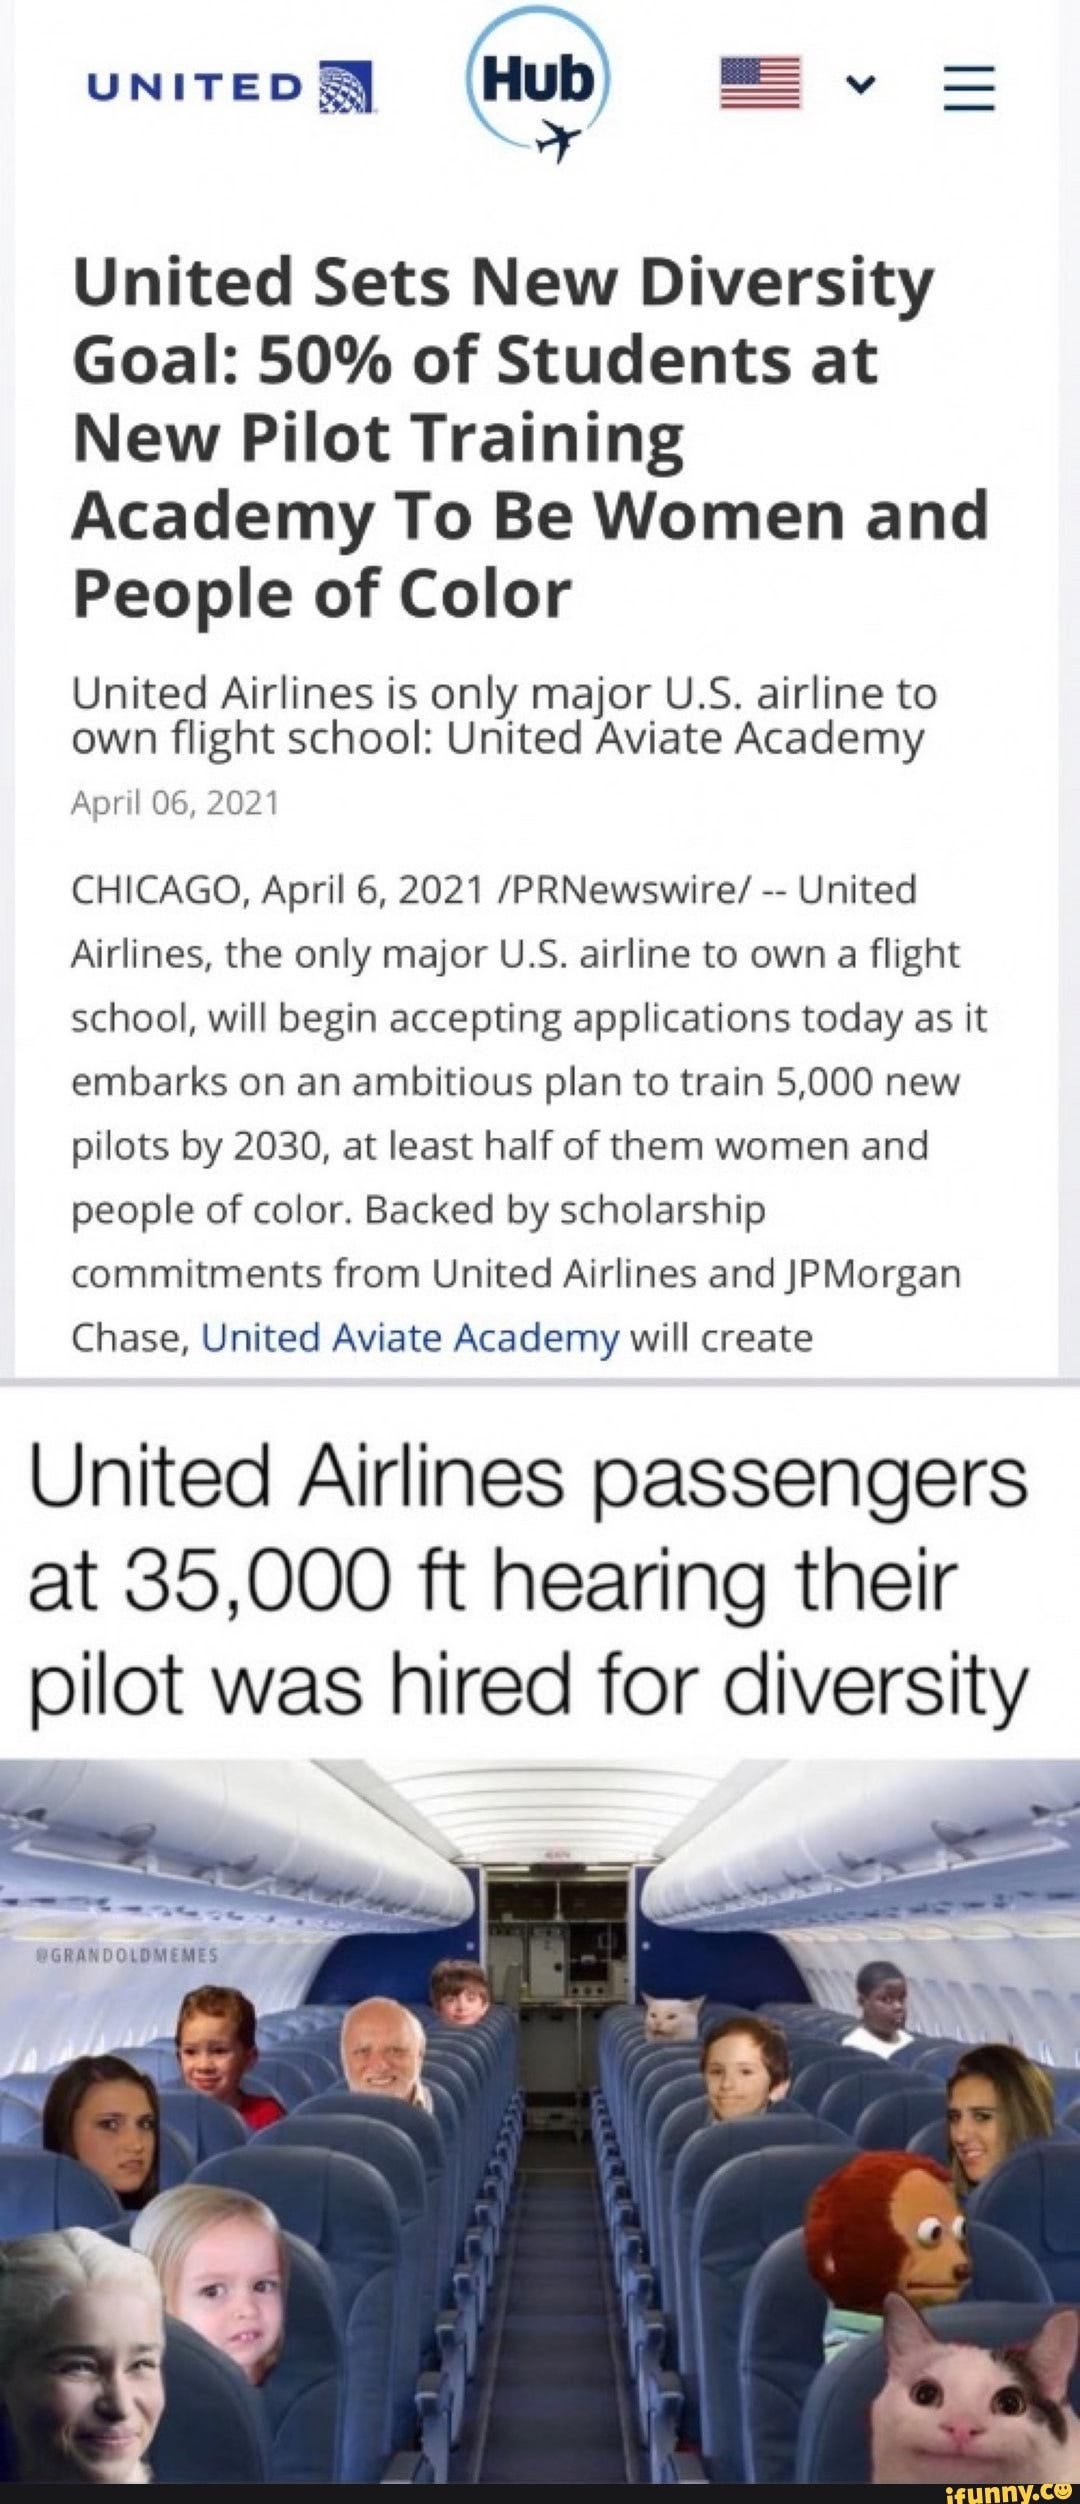 Image result from https://ifunny.co/picture/united-hub-united-sets-new-diversity-goal-50-of-students-3LRD9YpV8